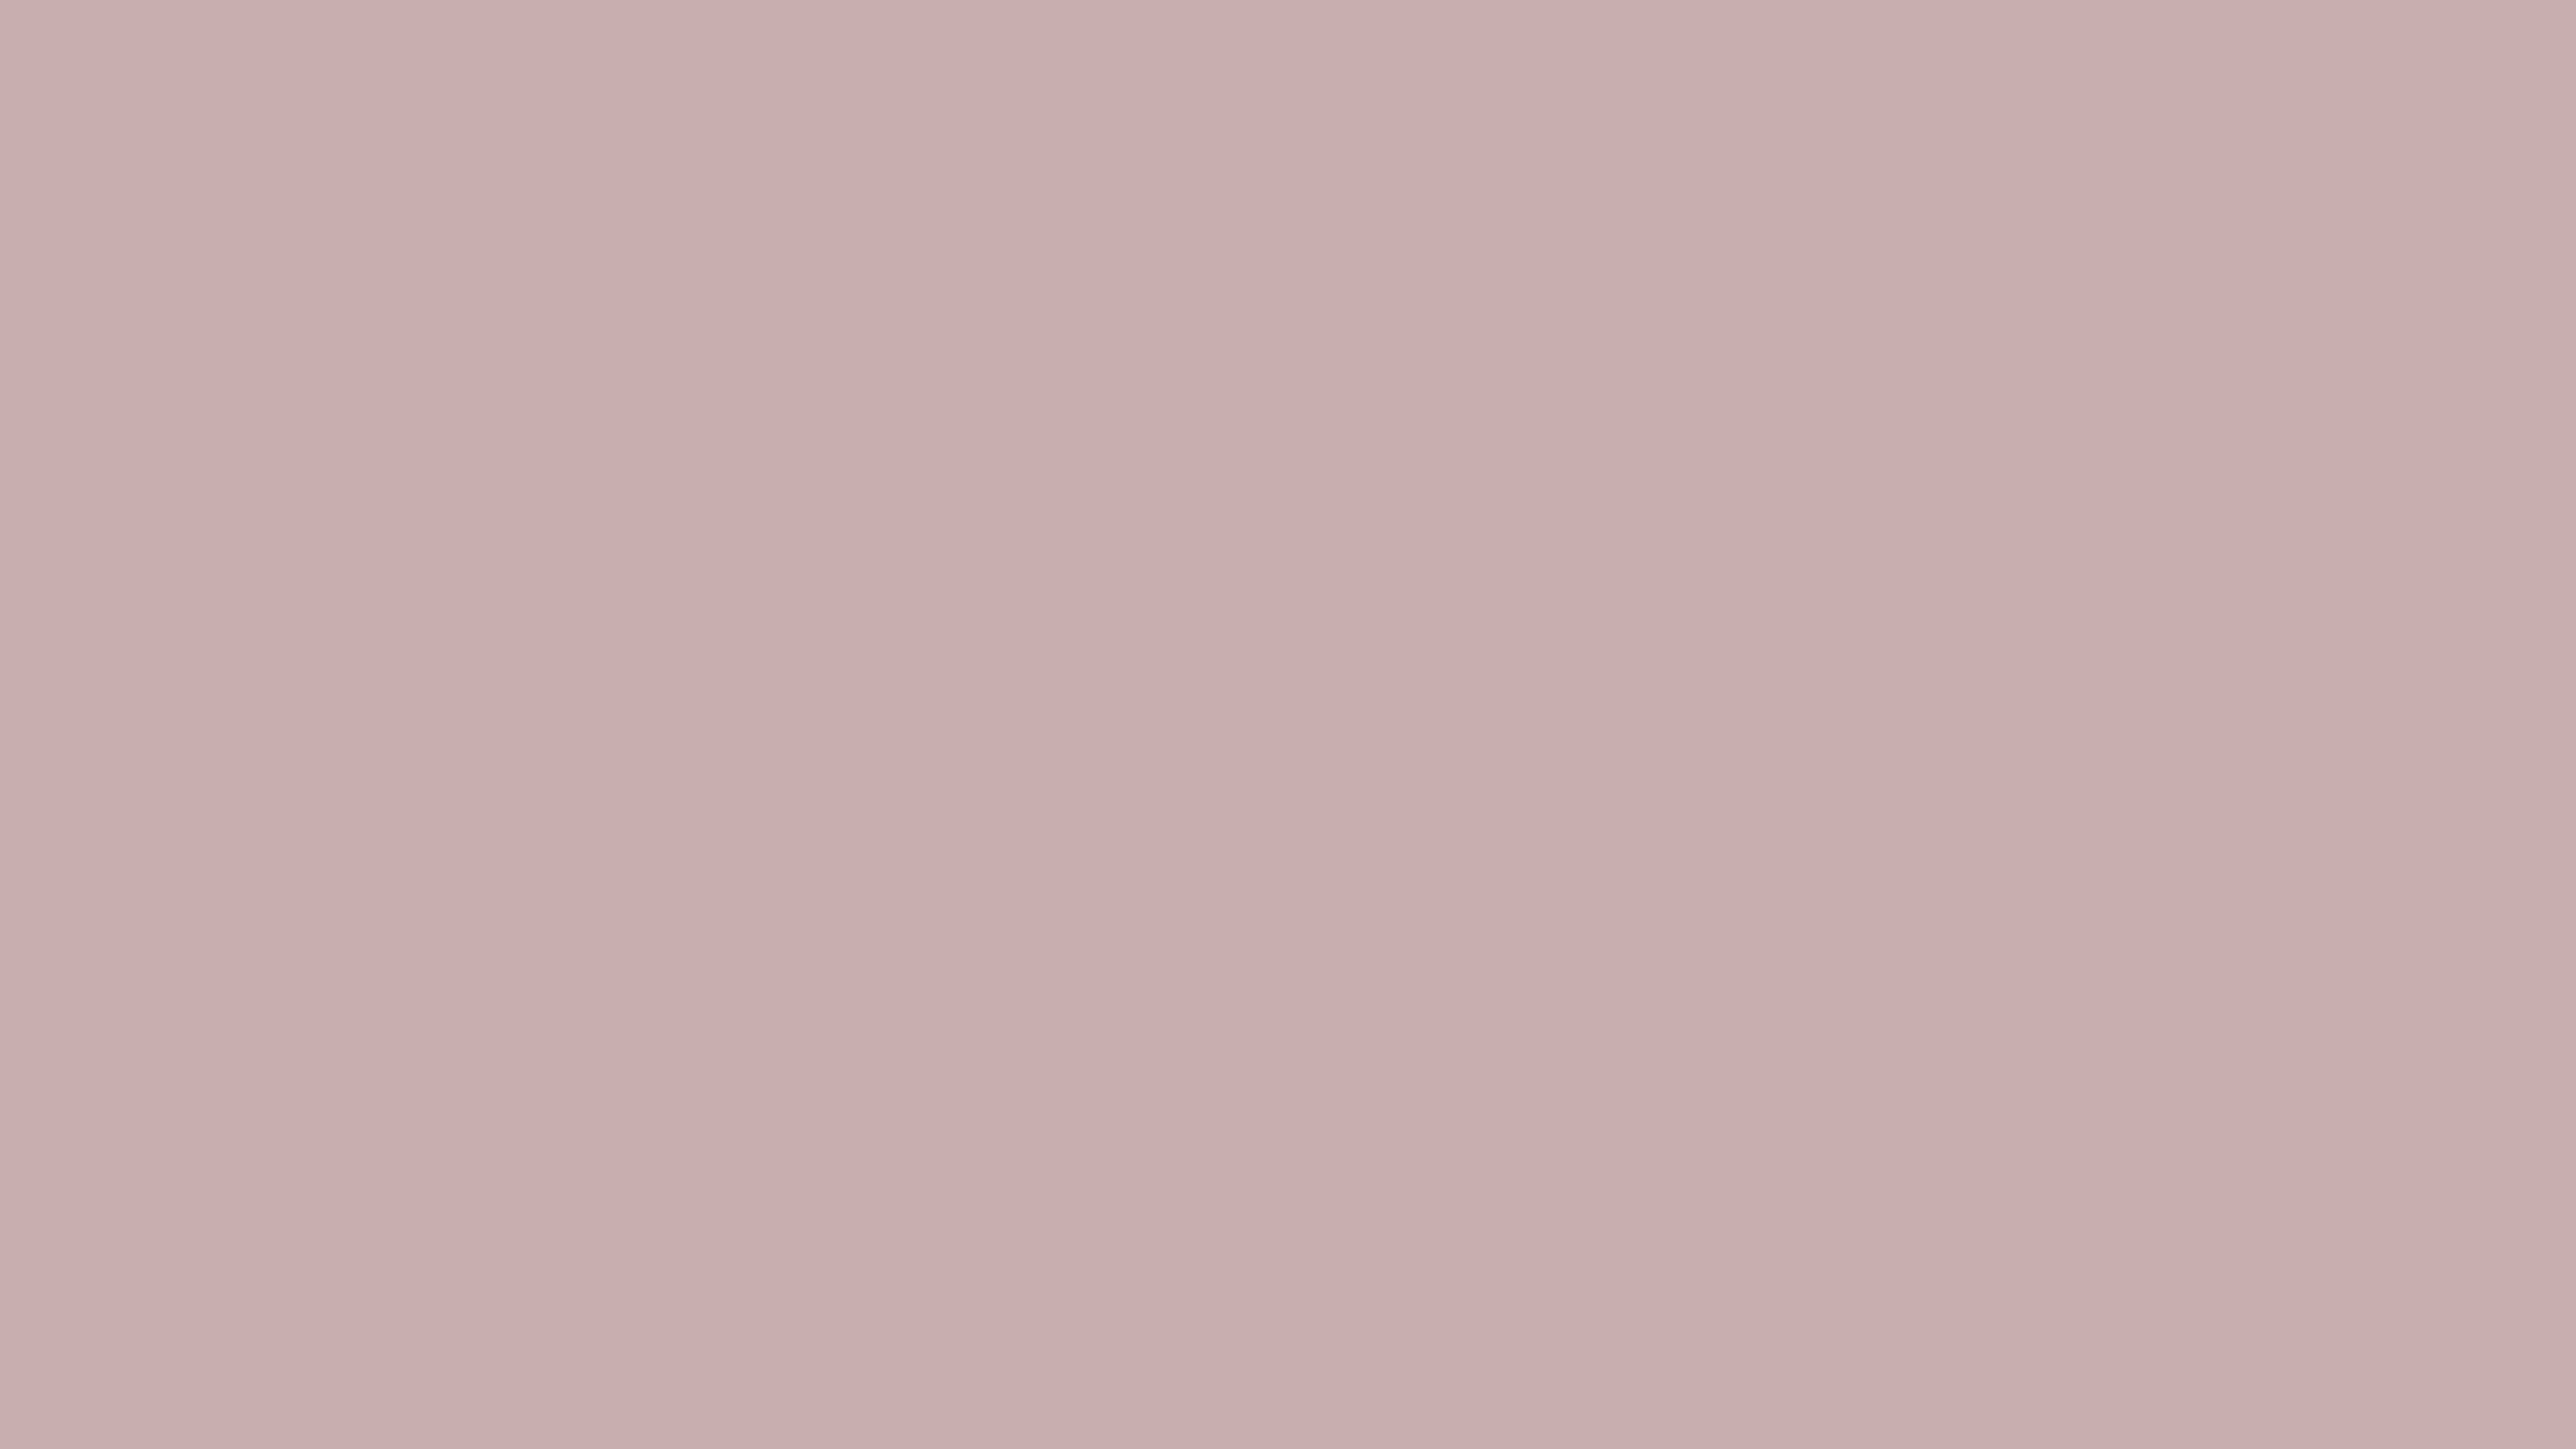 7680x4320 Silver Pink Solid Color Background